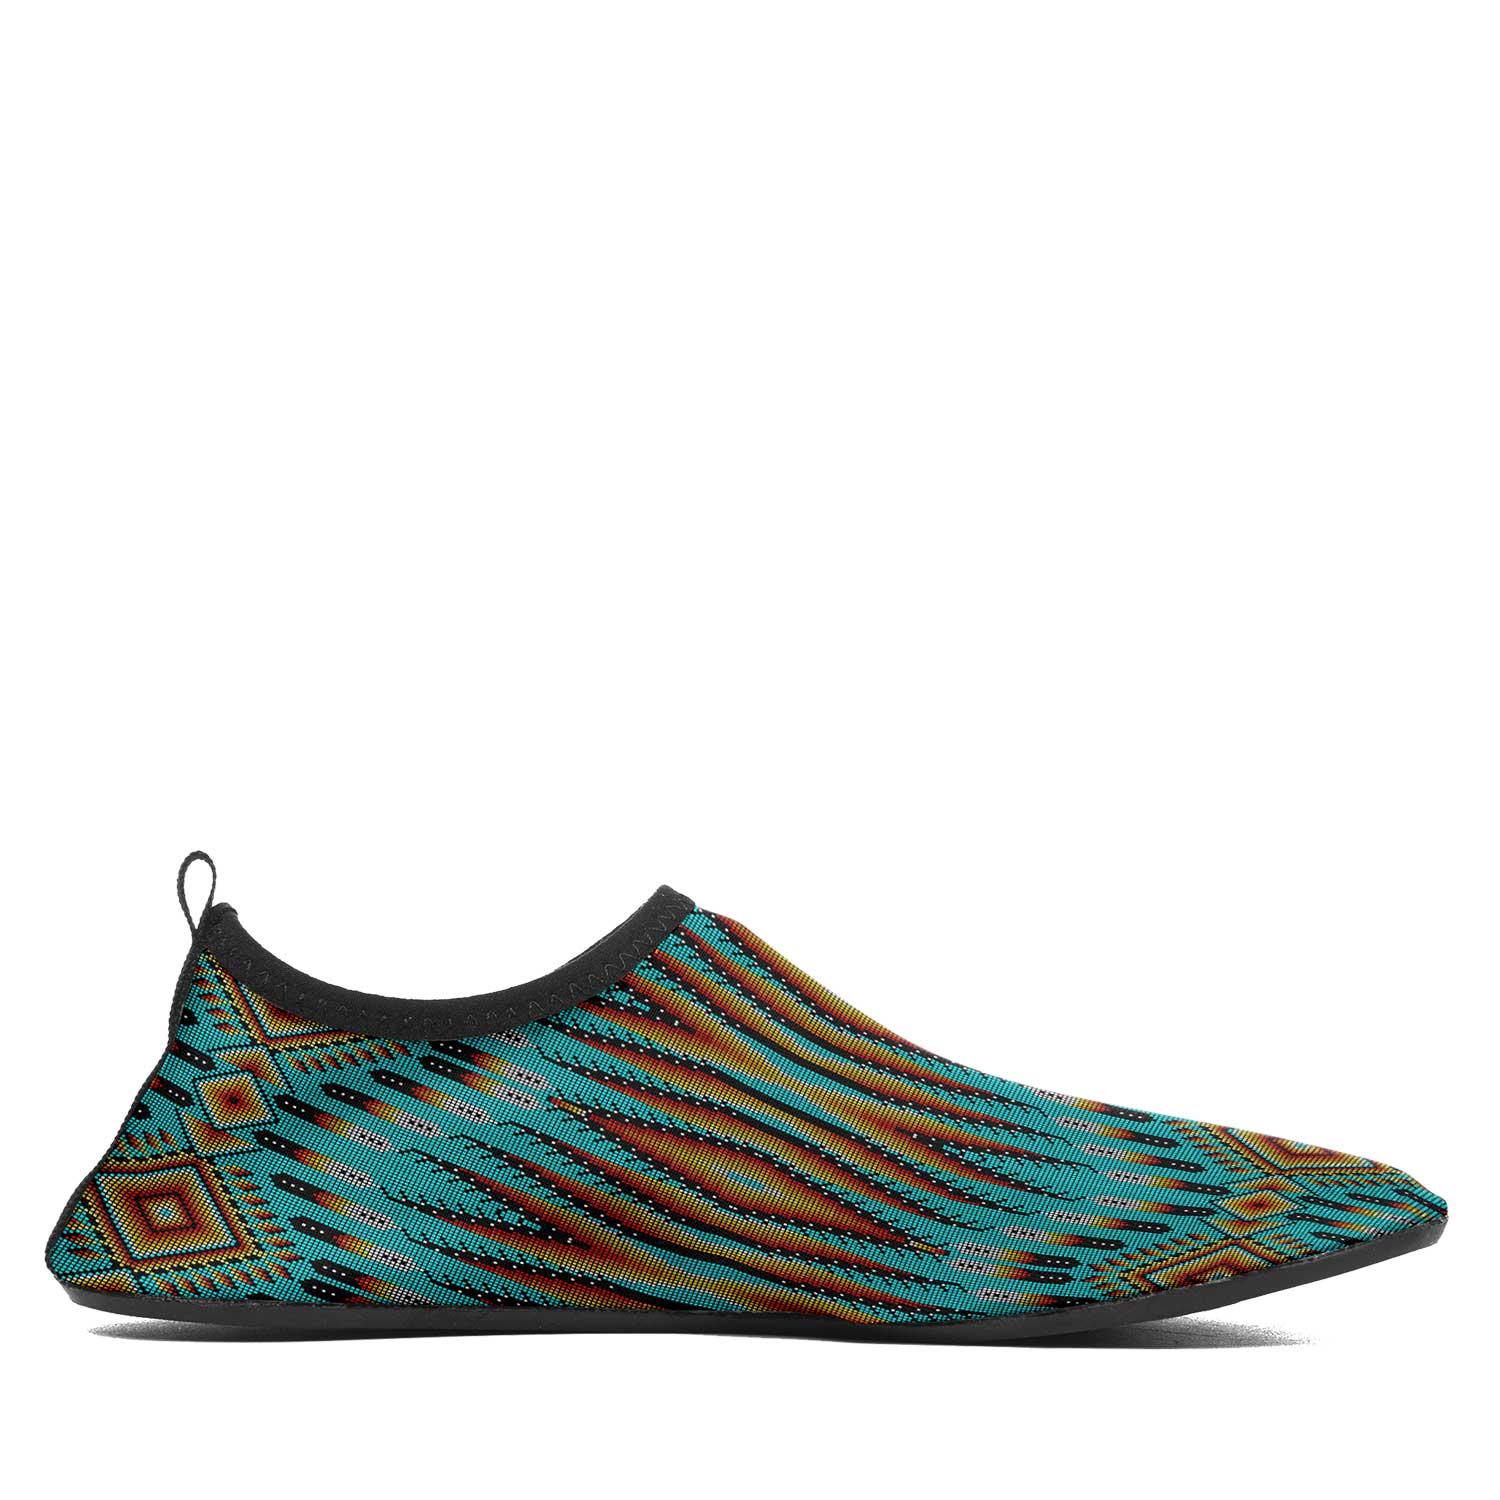 Fire Feather Turquoise Kid's Sockamoccs Slip On Shoes